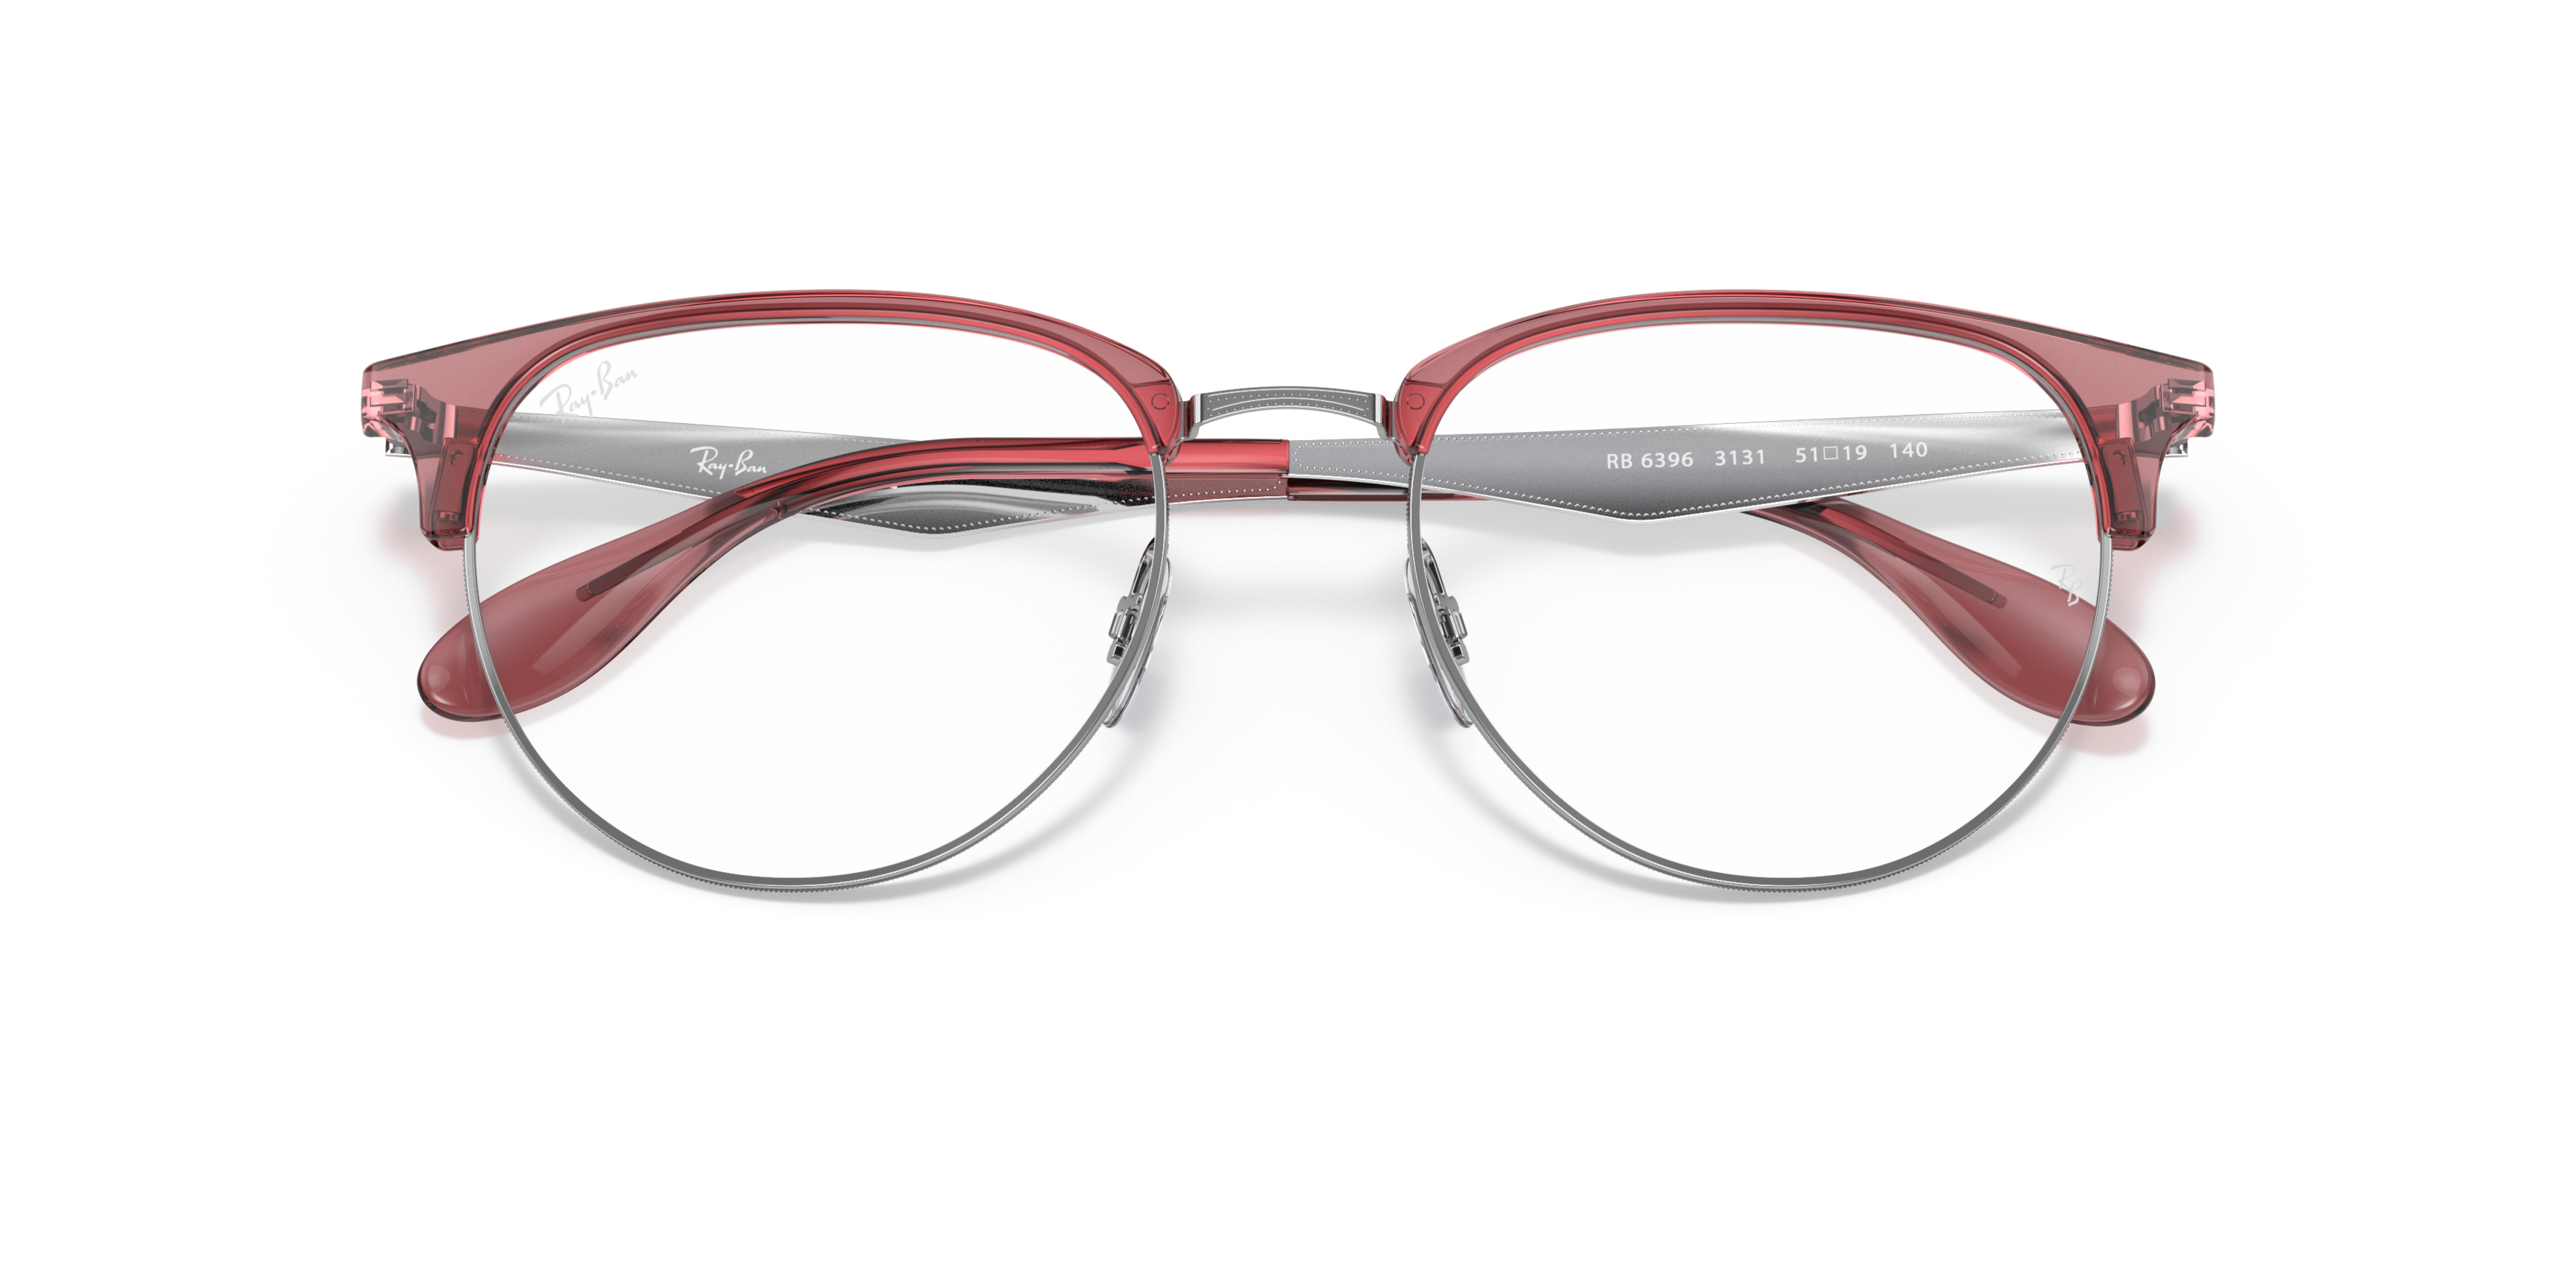 Folded Ray-Ban RX 6396 Glasses Transparent / Transparent, Red